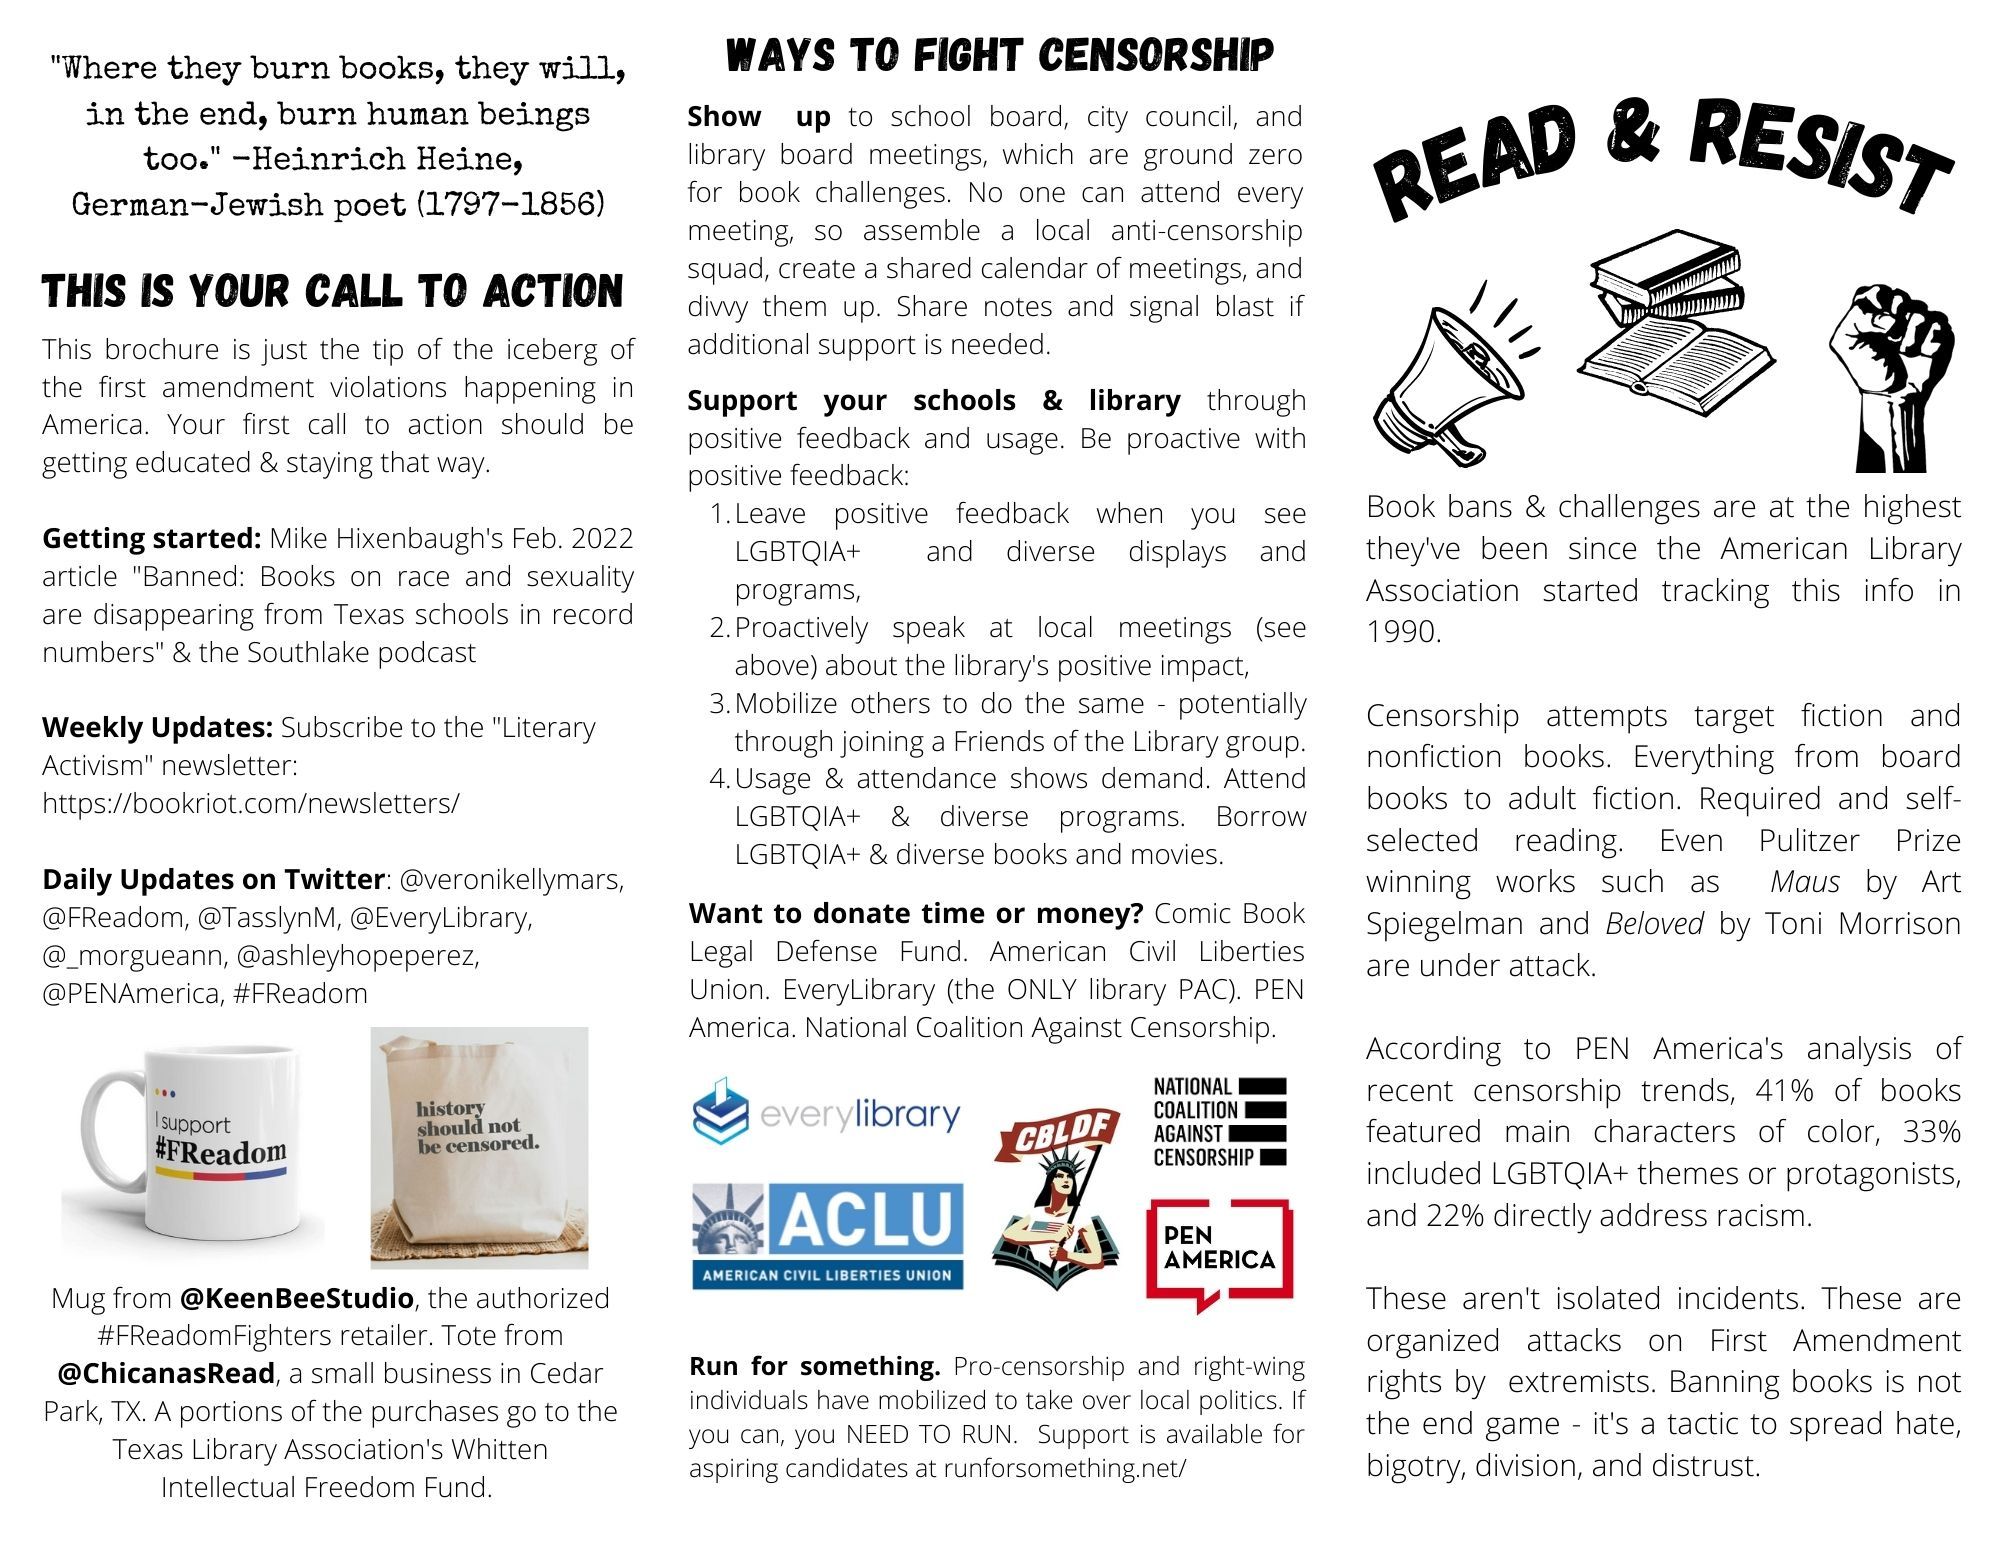 image from read and resist brochure.